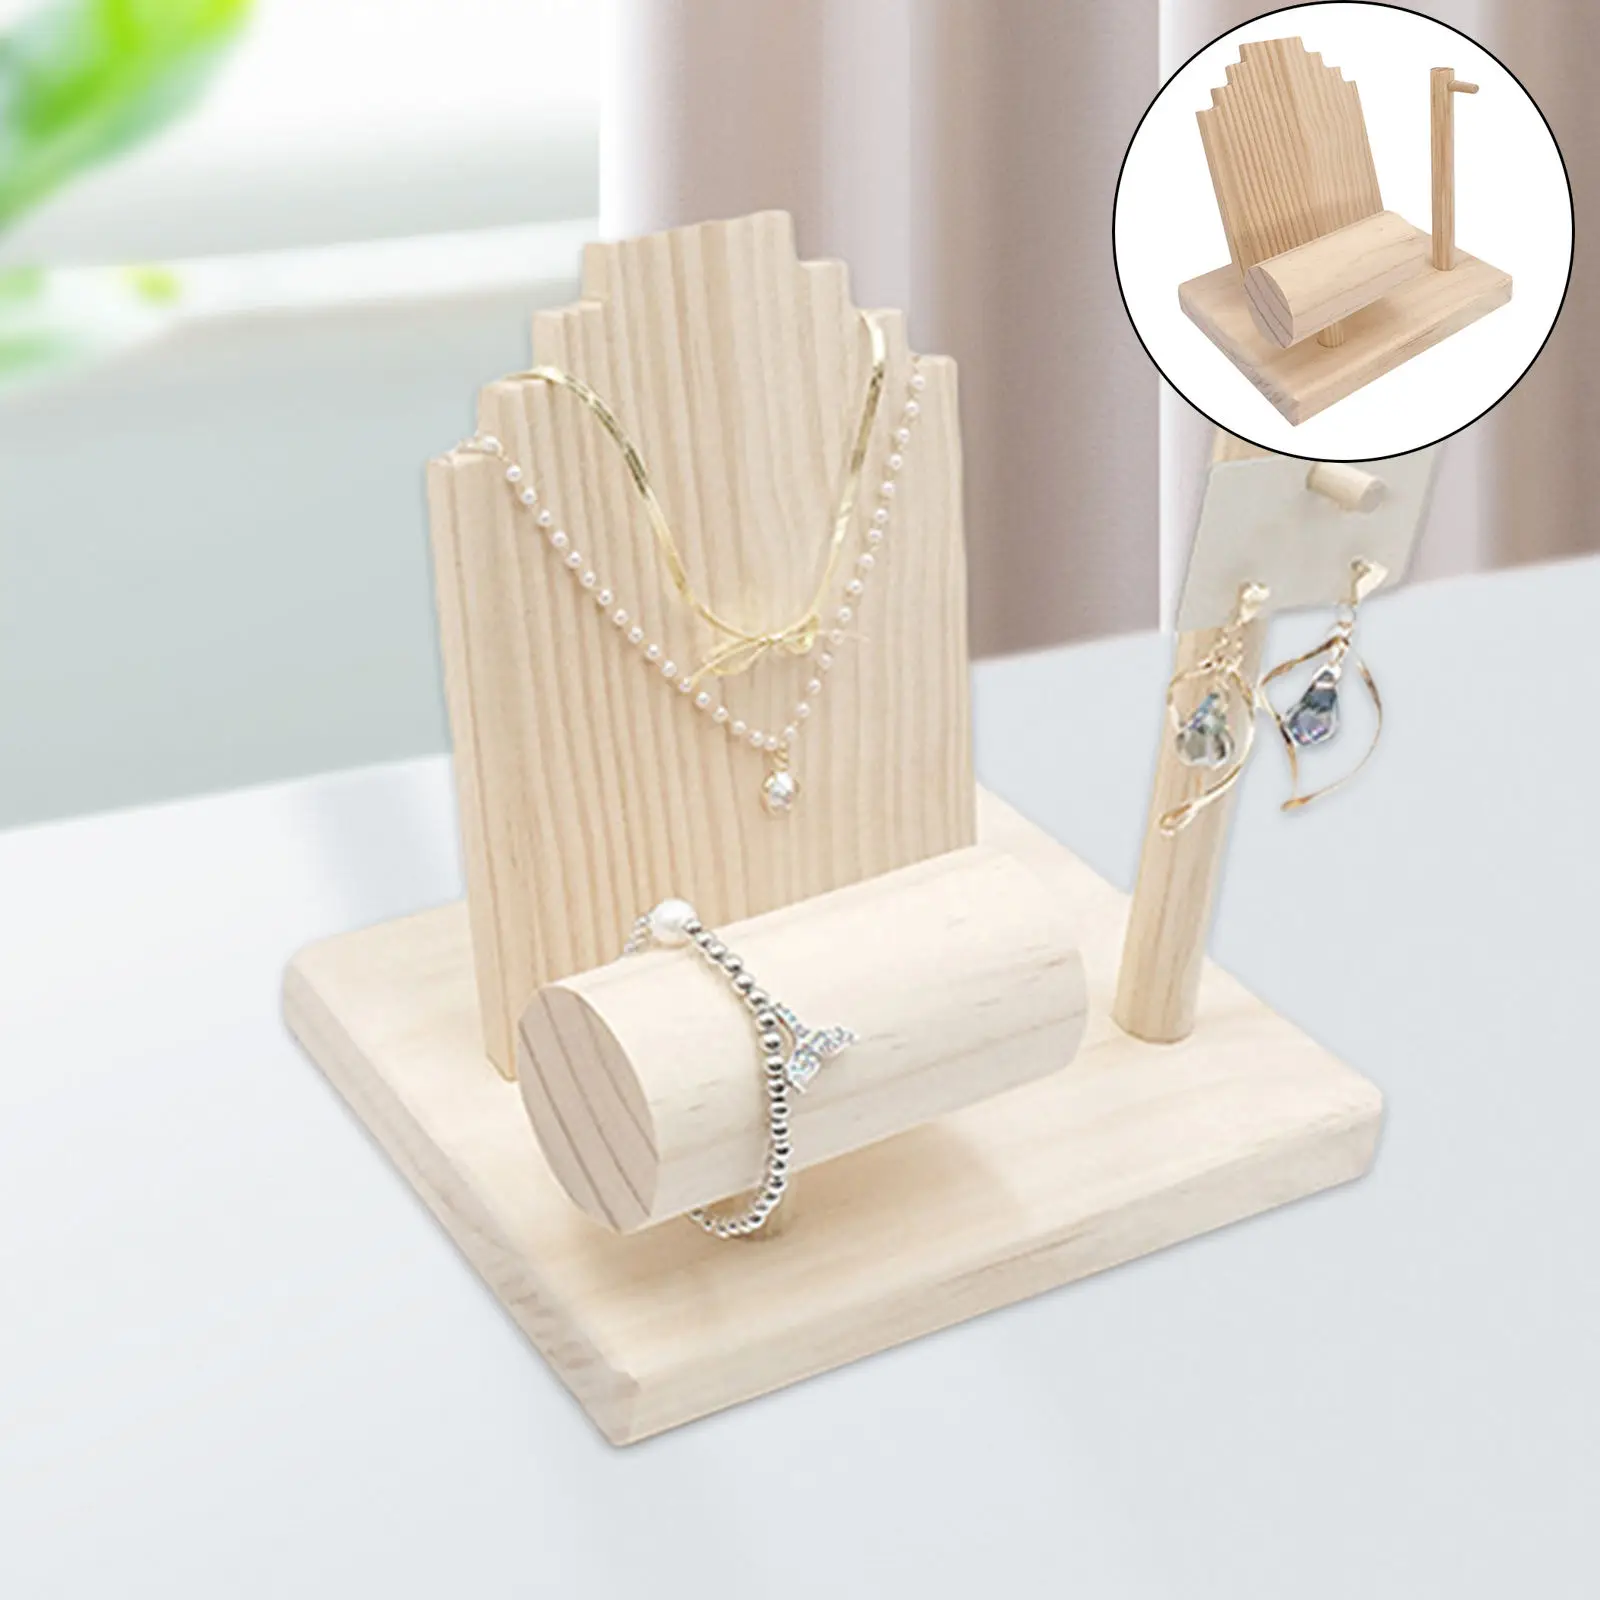 Solid Wood Jewelry Display Stand Home Decor Organization Holder Rack for Necklace Home Earrings Daughter Mom Gifts